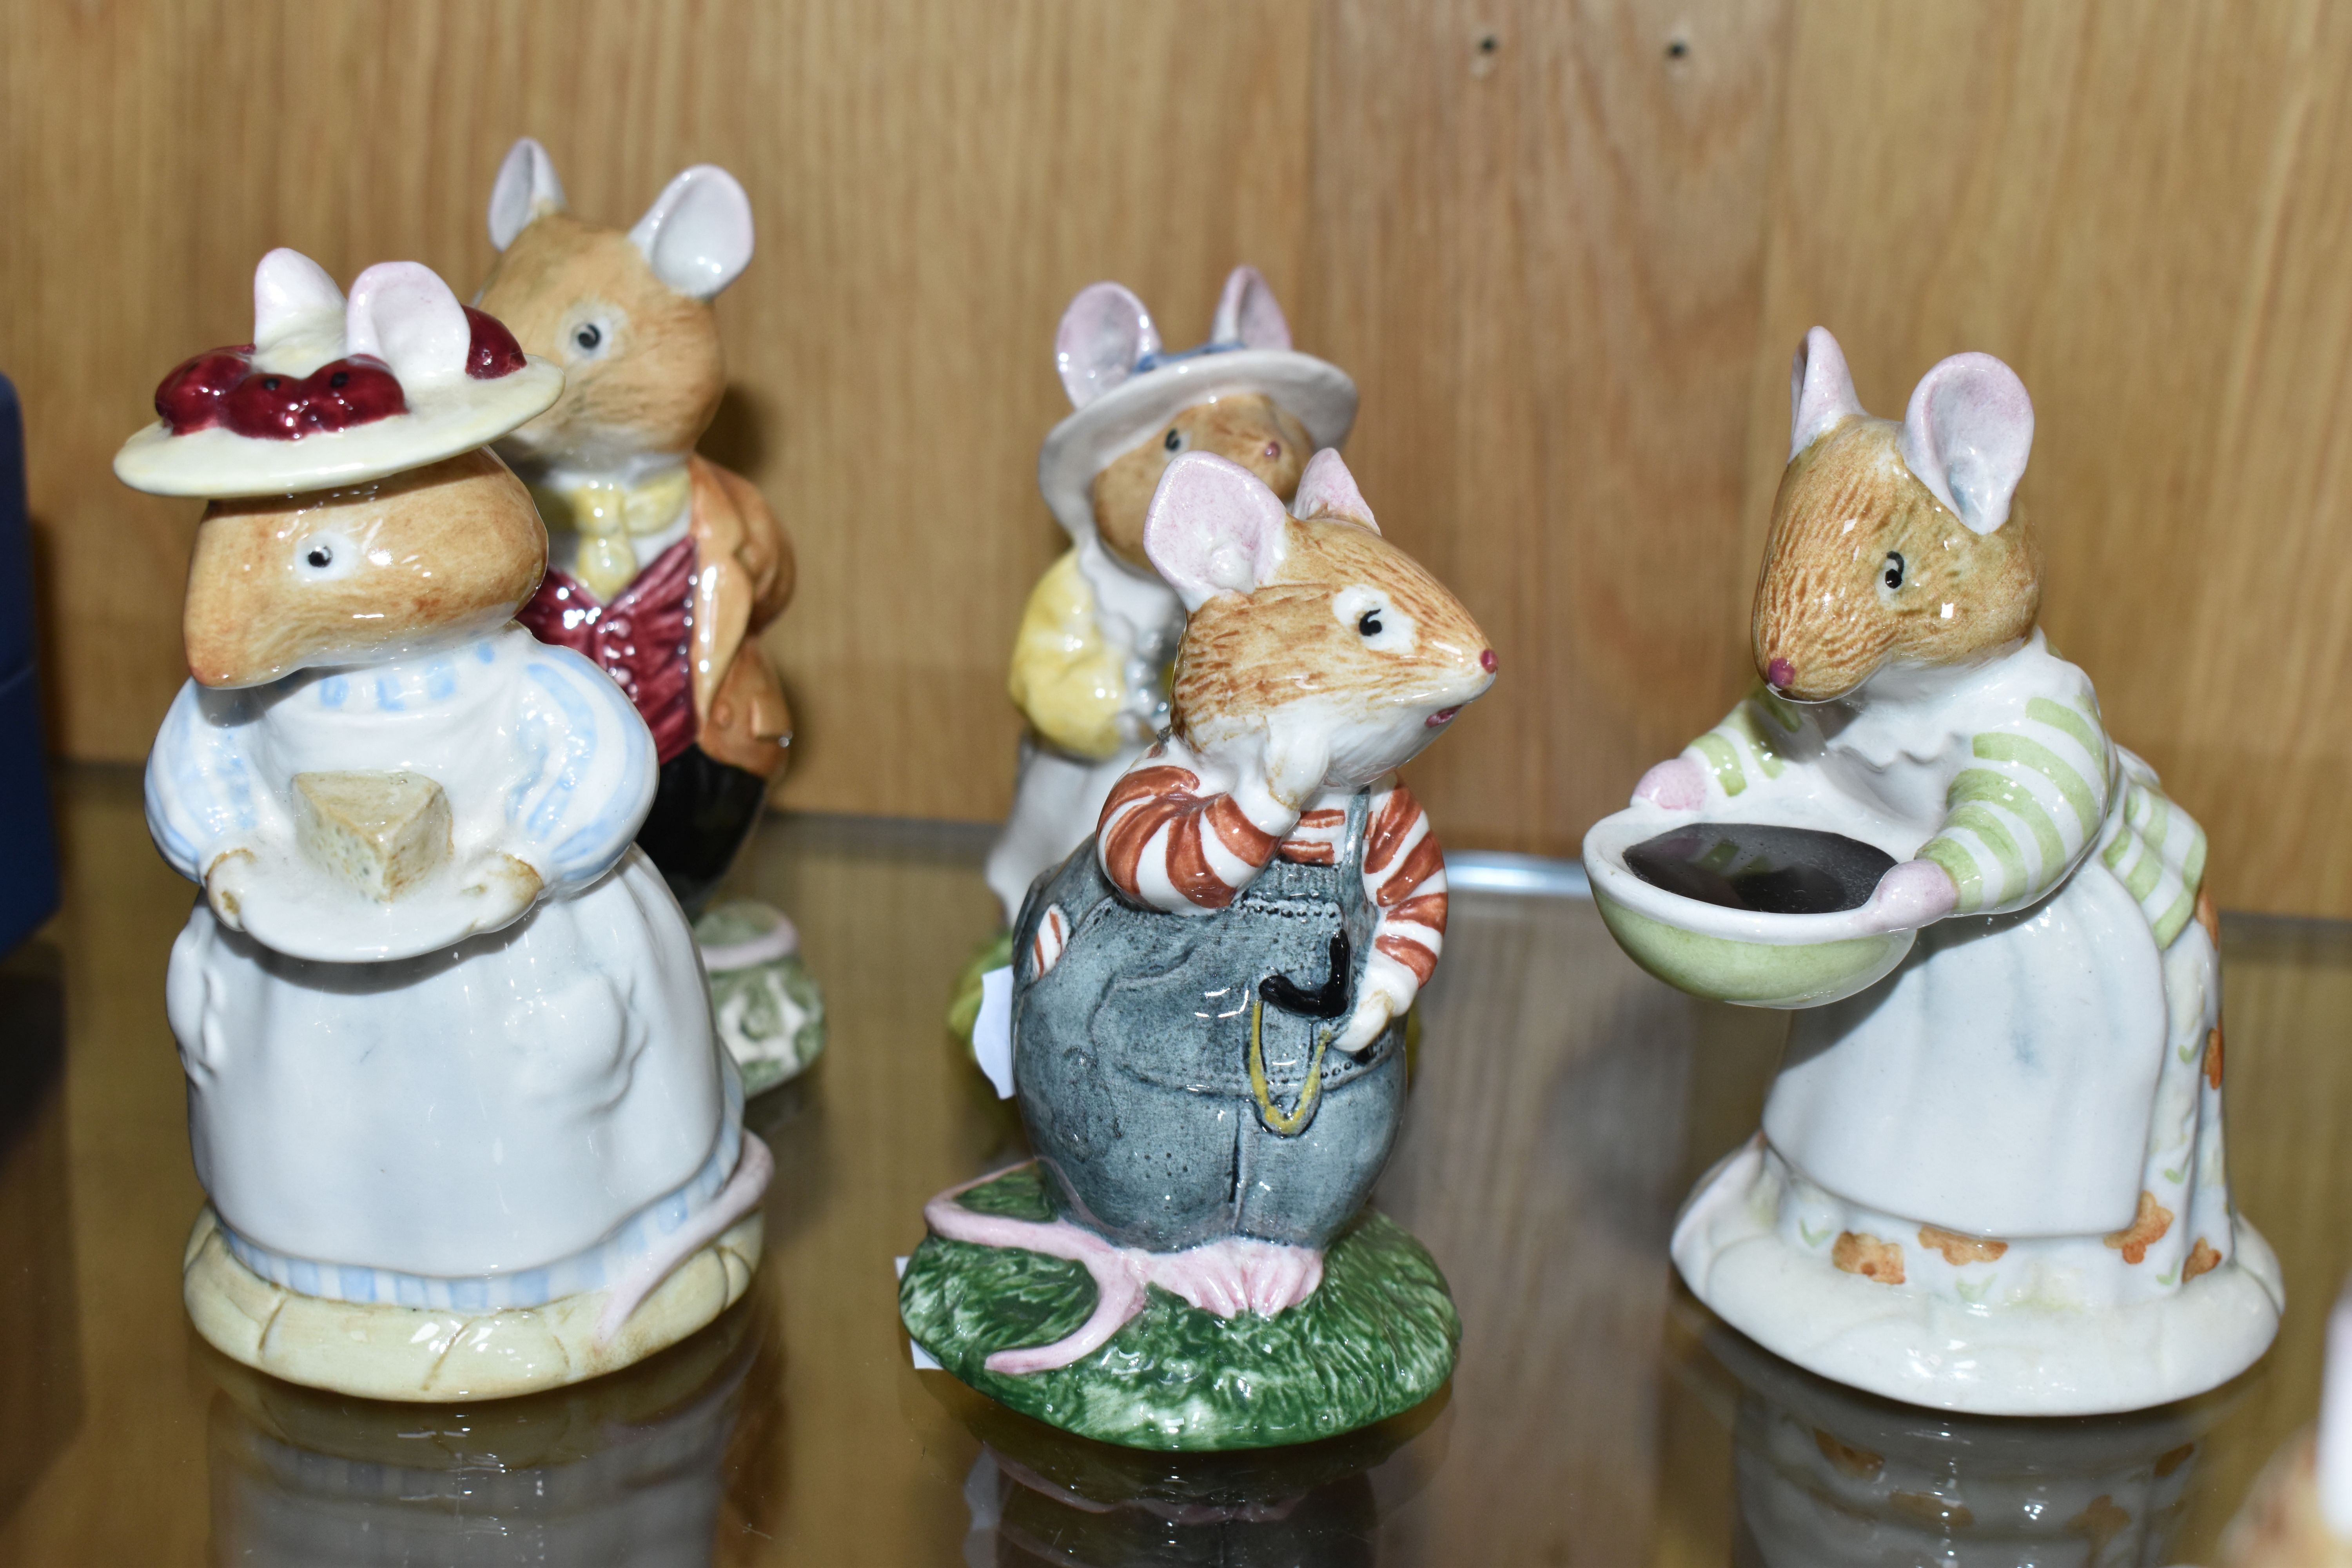 ELEVEN ROYAL DOULTON BRAMBLY HEDGE FIGURES, comprising 'Poppy Eyebright' DBH1, 'Mr. Apple' DBH2, ' - Image 5 of 6